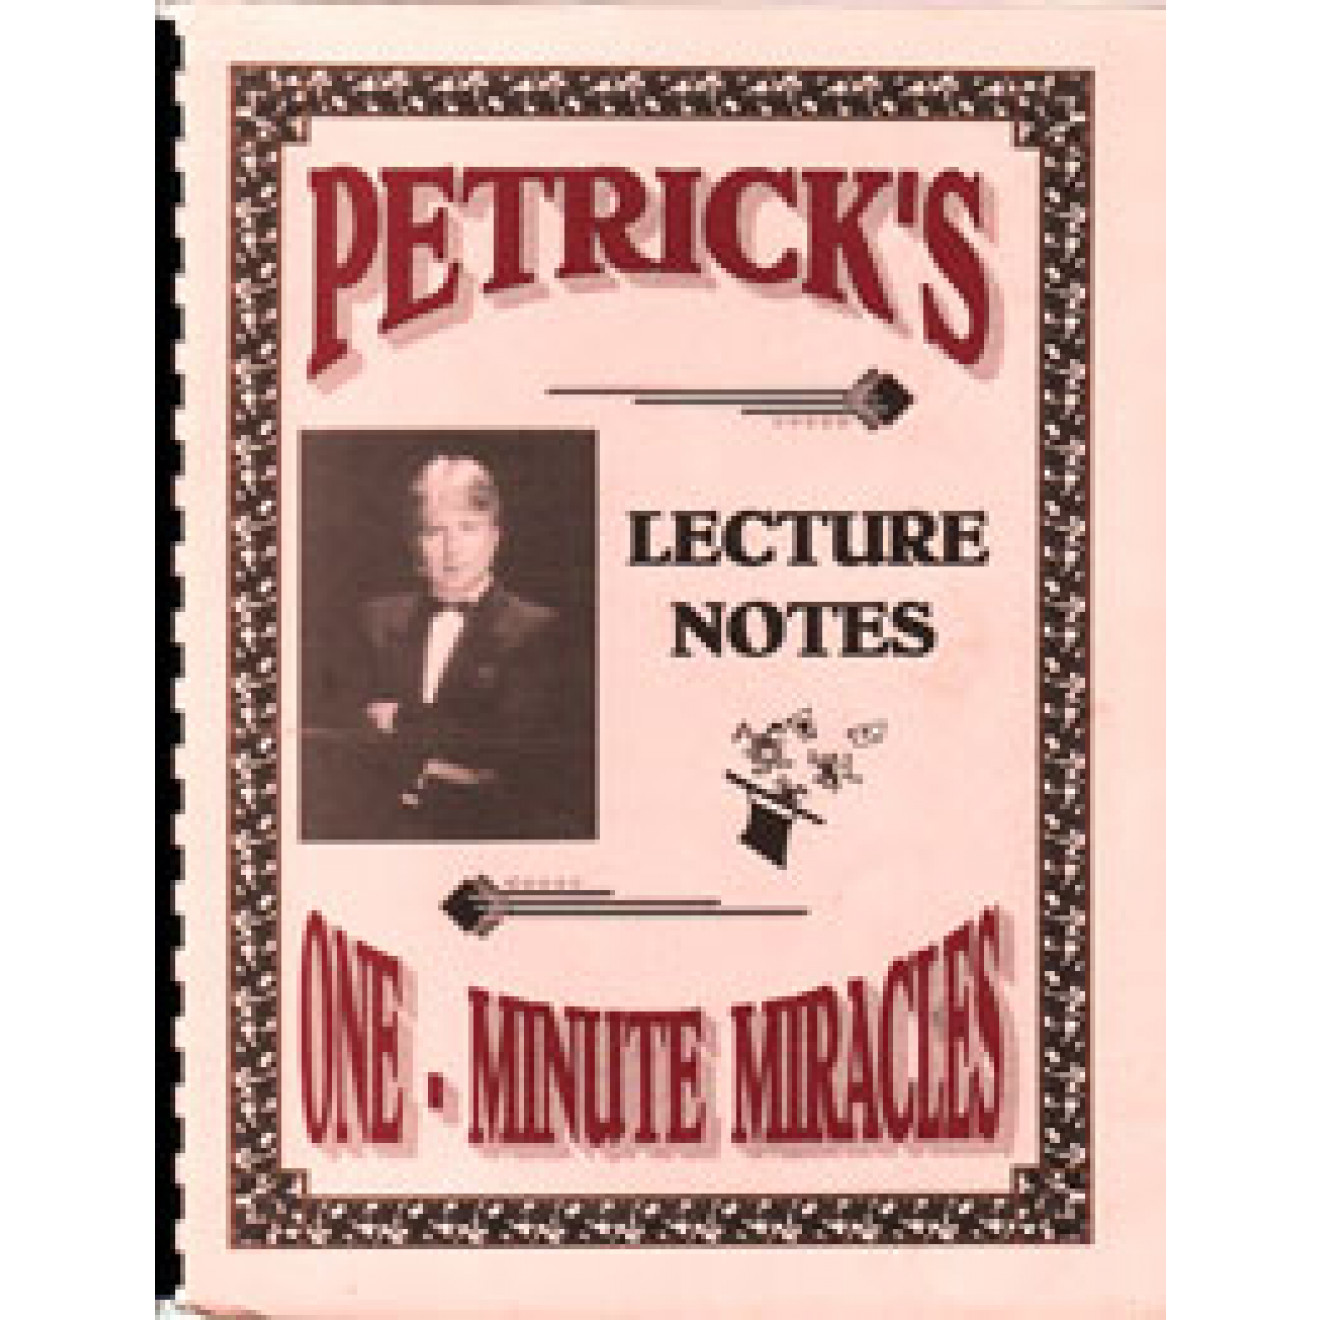 Petrick's Lecture Notes # 1 - One-Minute Miracles